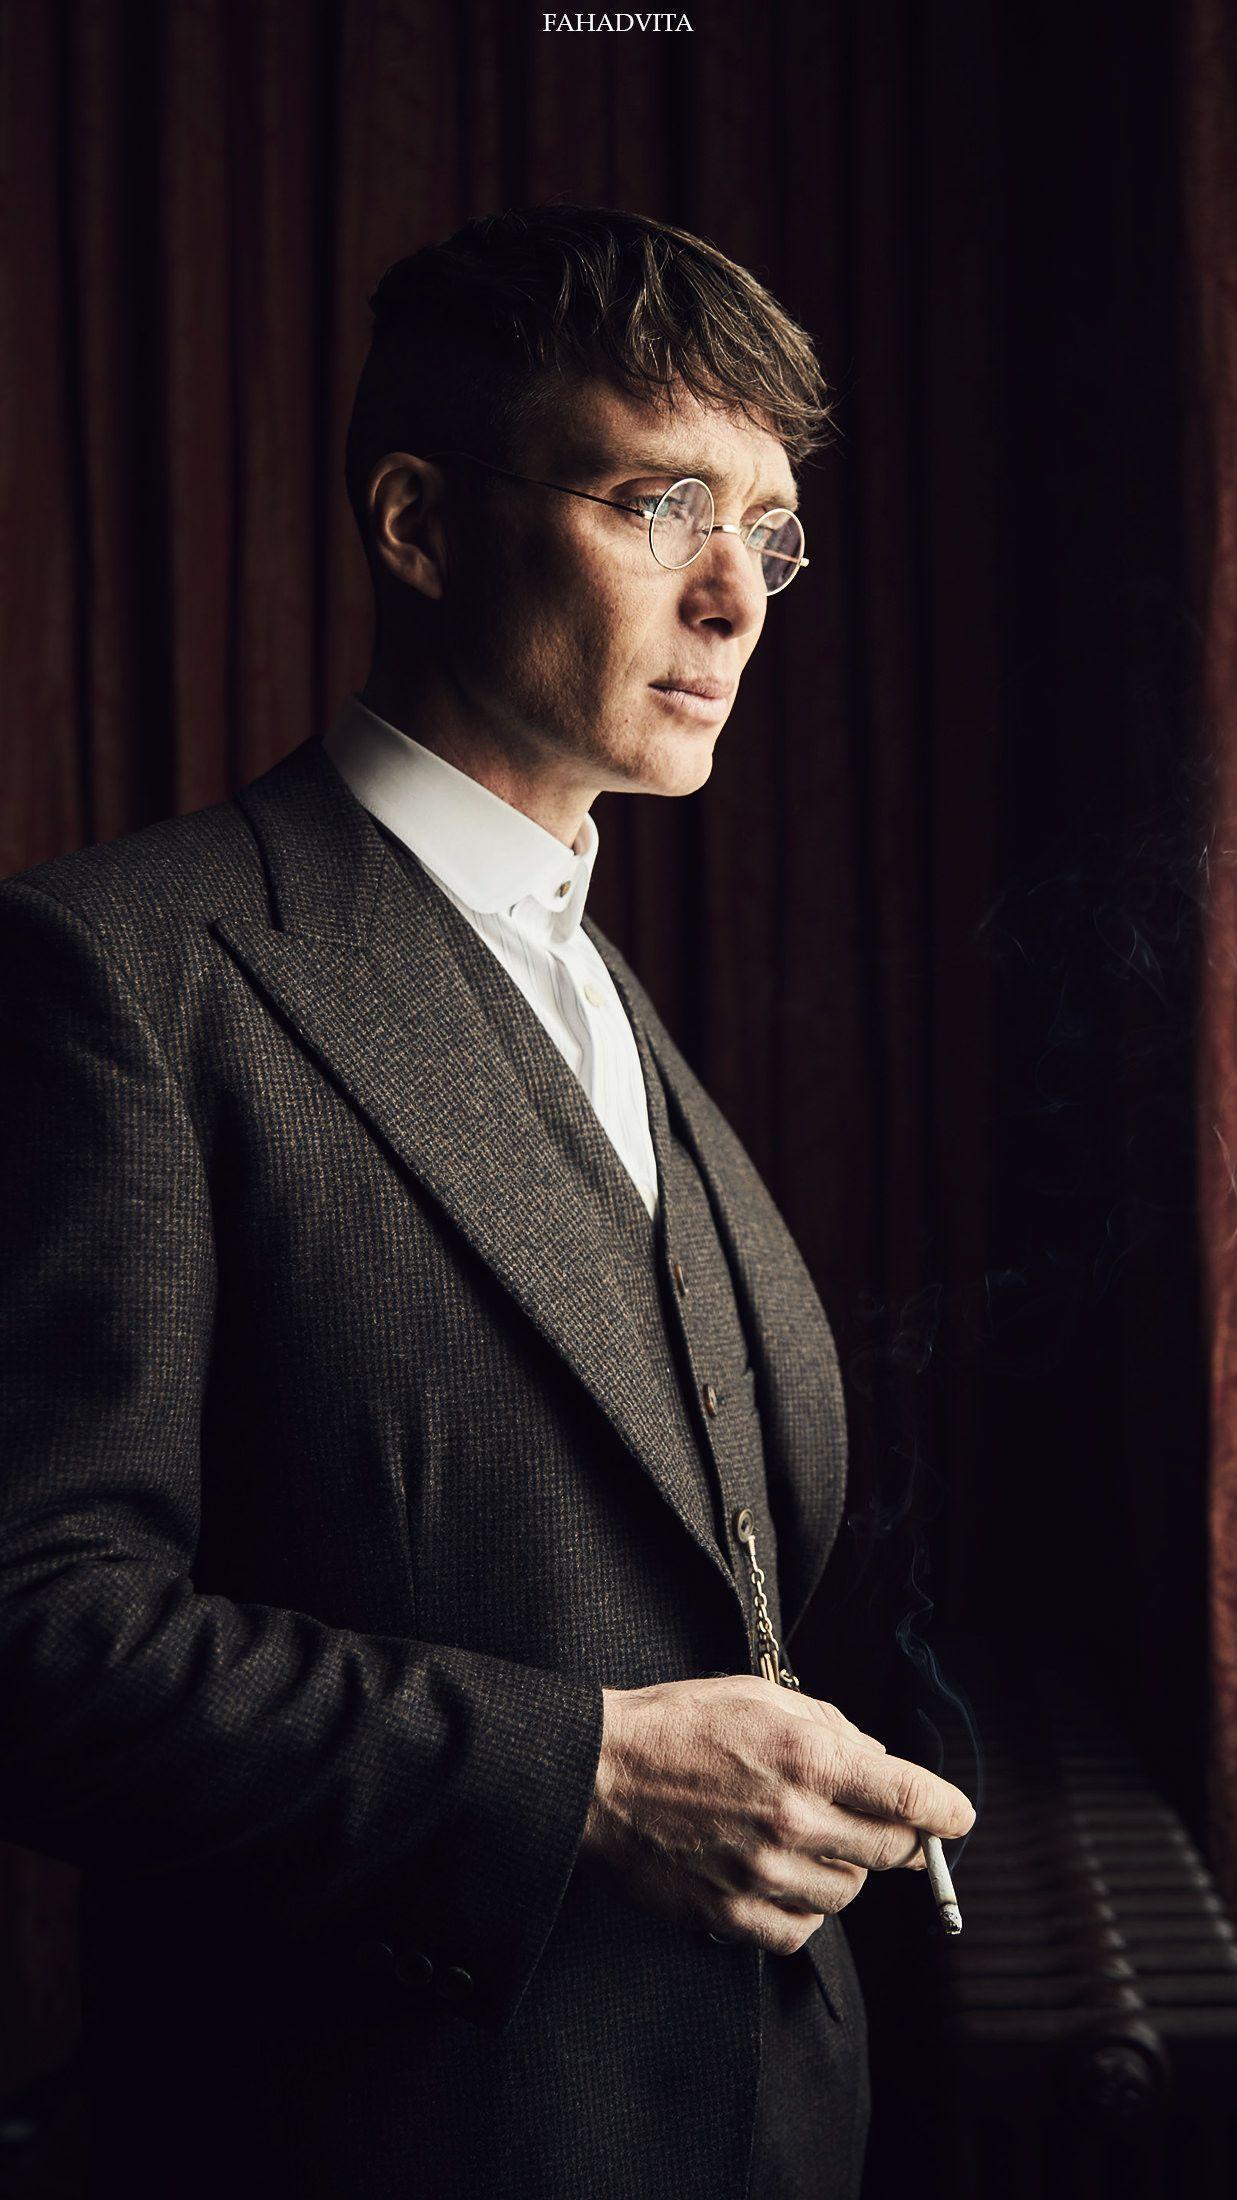 tommy shelby wallpaper. Peaky blinders wallpaper, Peaky blinders tommy shelby, Peaky blinders poster